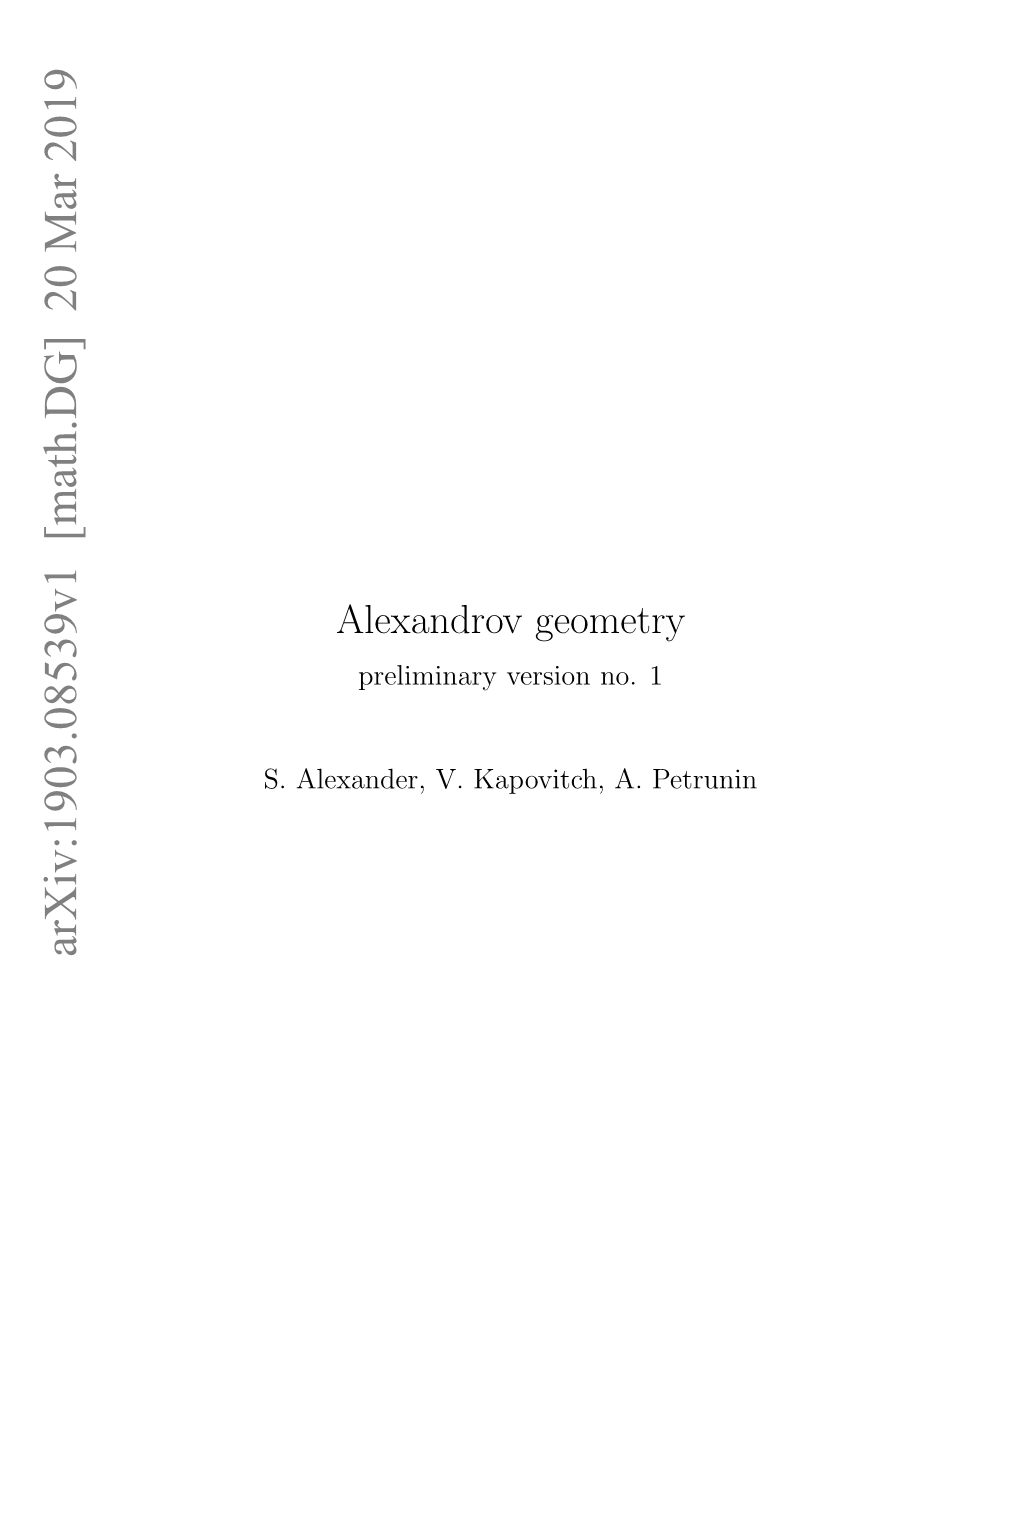 Alexandrov Geometry, Angles Deﬁned As in Section 5.3 Always Exist (See Theorem 7.3.1C and Corollary 8.3.2B)